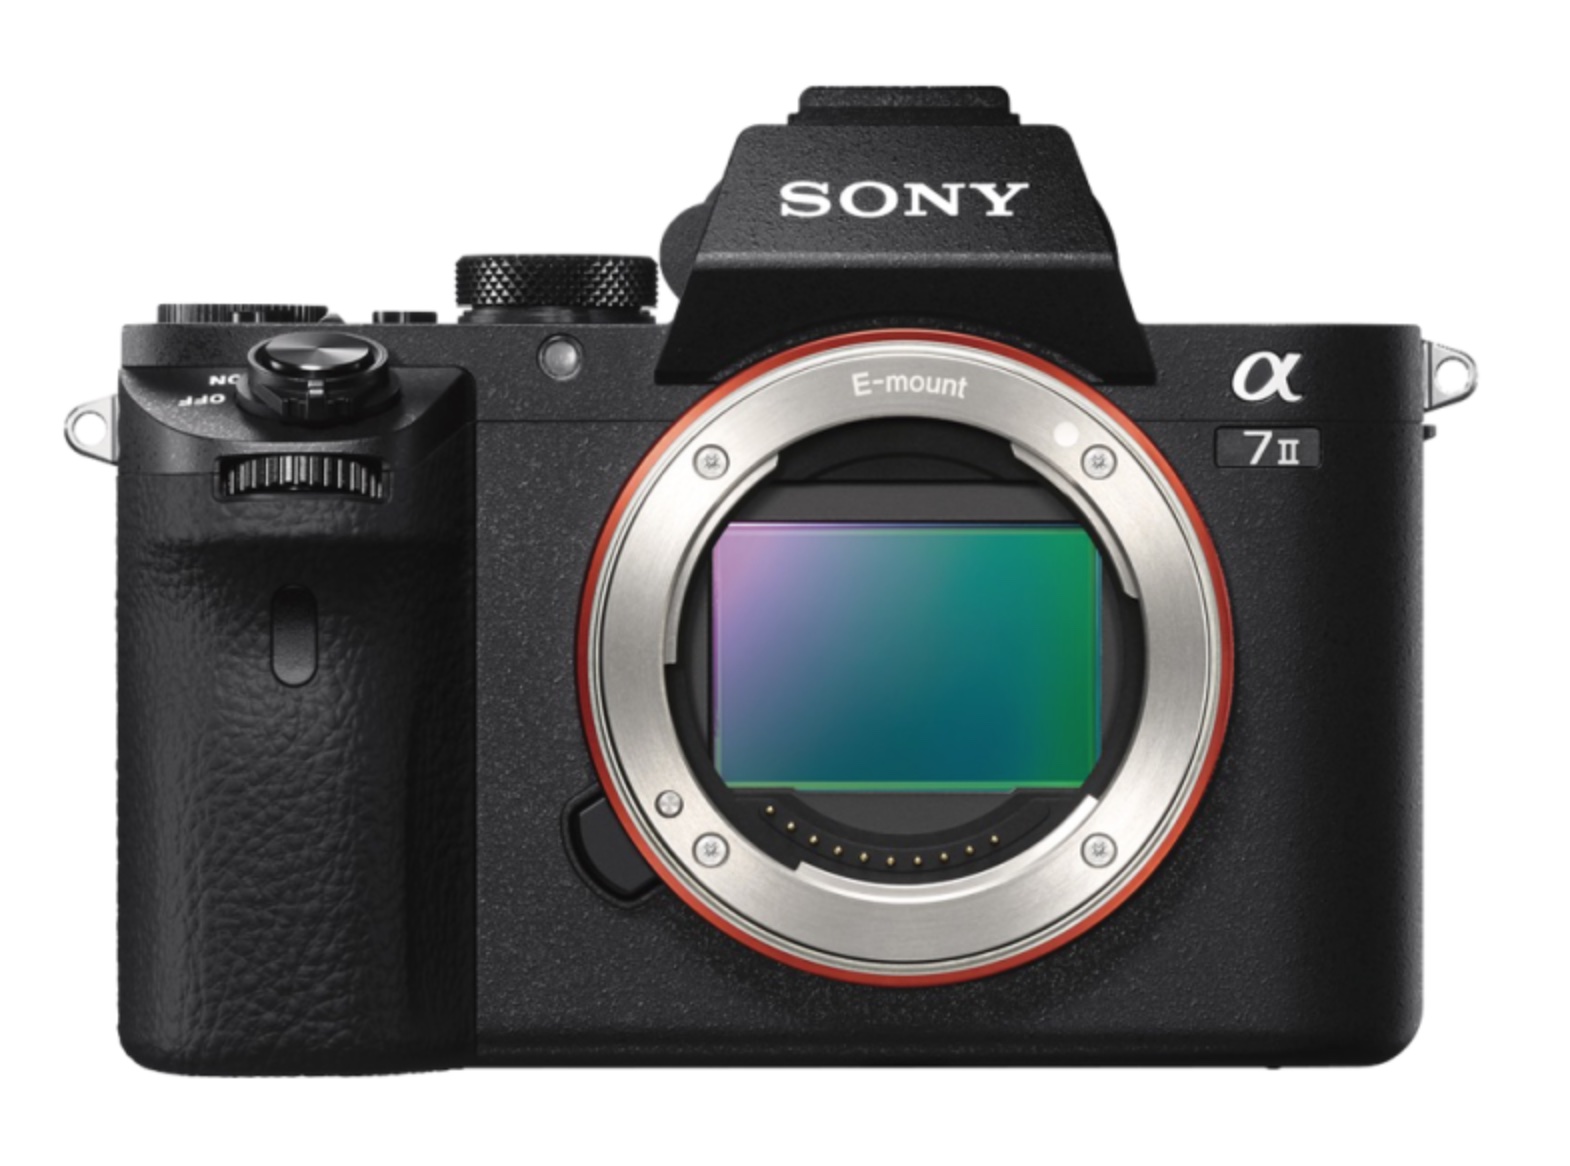 http://thedigitalstory.com/2015/03/31/sony-a7ii-front.jpg